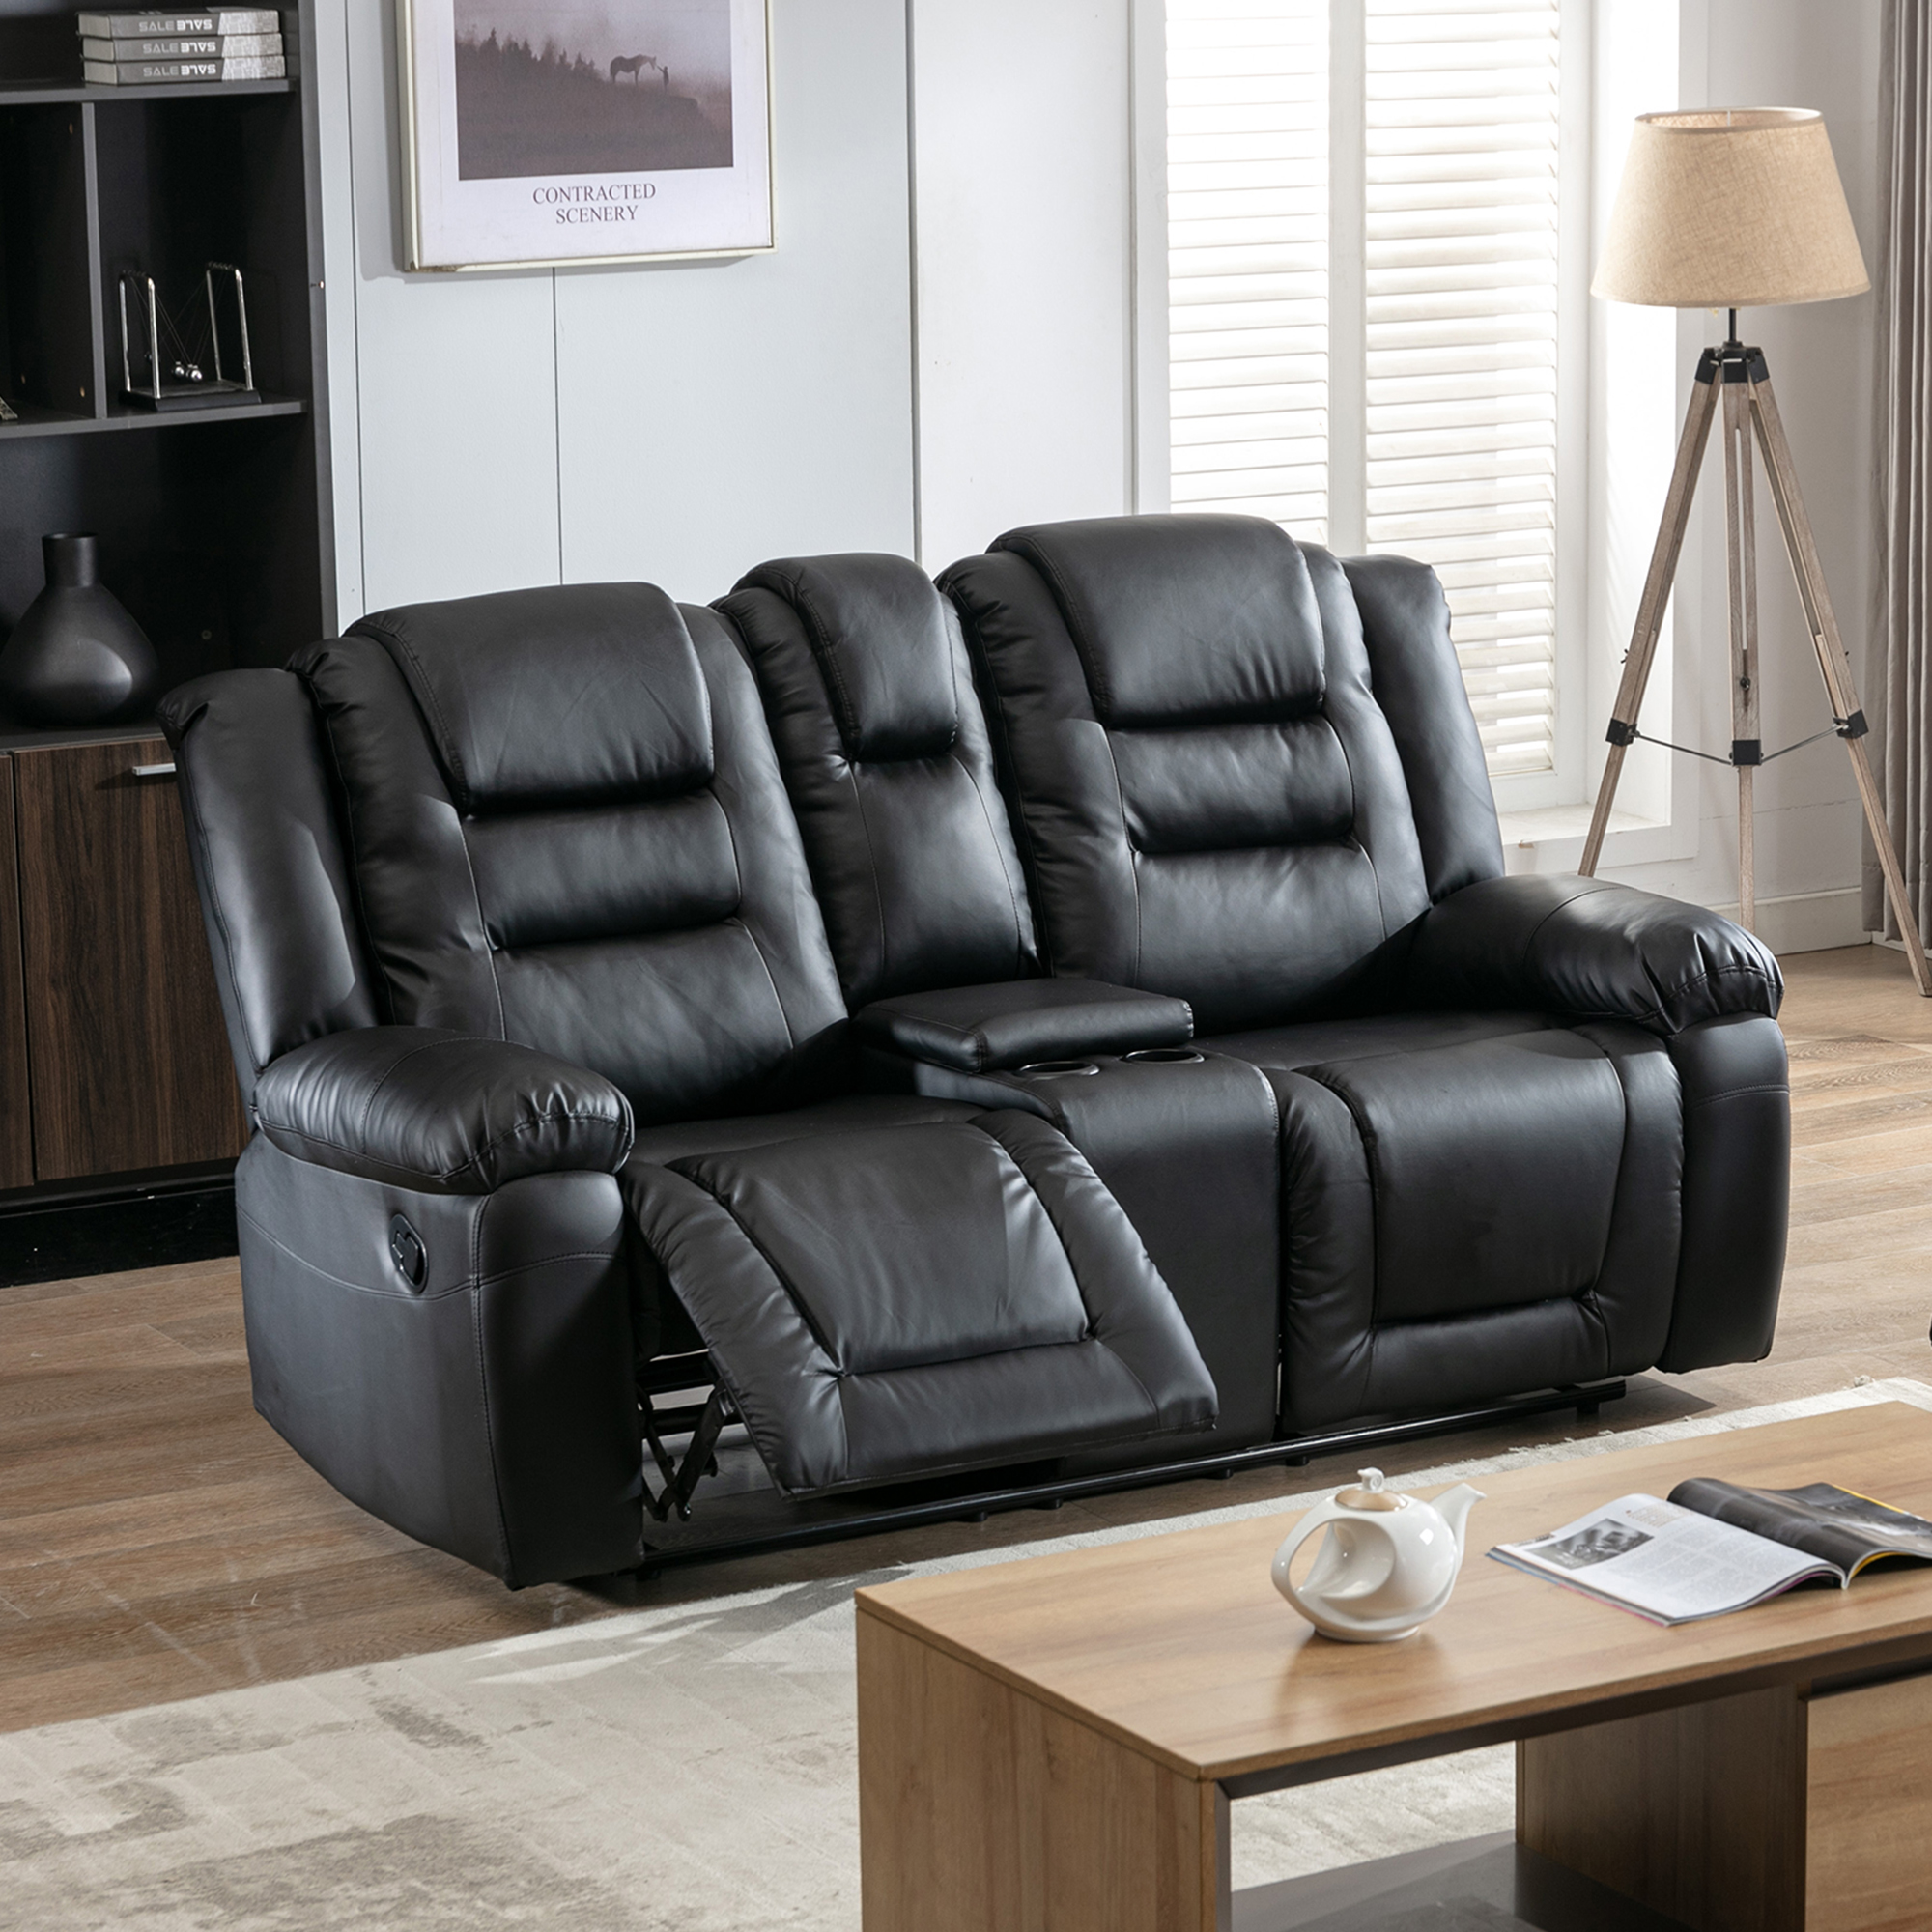 Orisfur. Home Theater Seating Manual Recliner, PU Leather Reclining Loveseat for Living Room (Recliner Loveseat）-Boyel Living